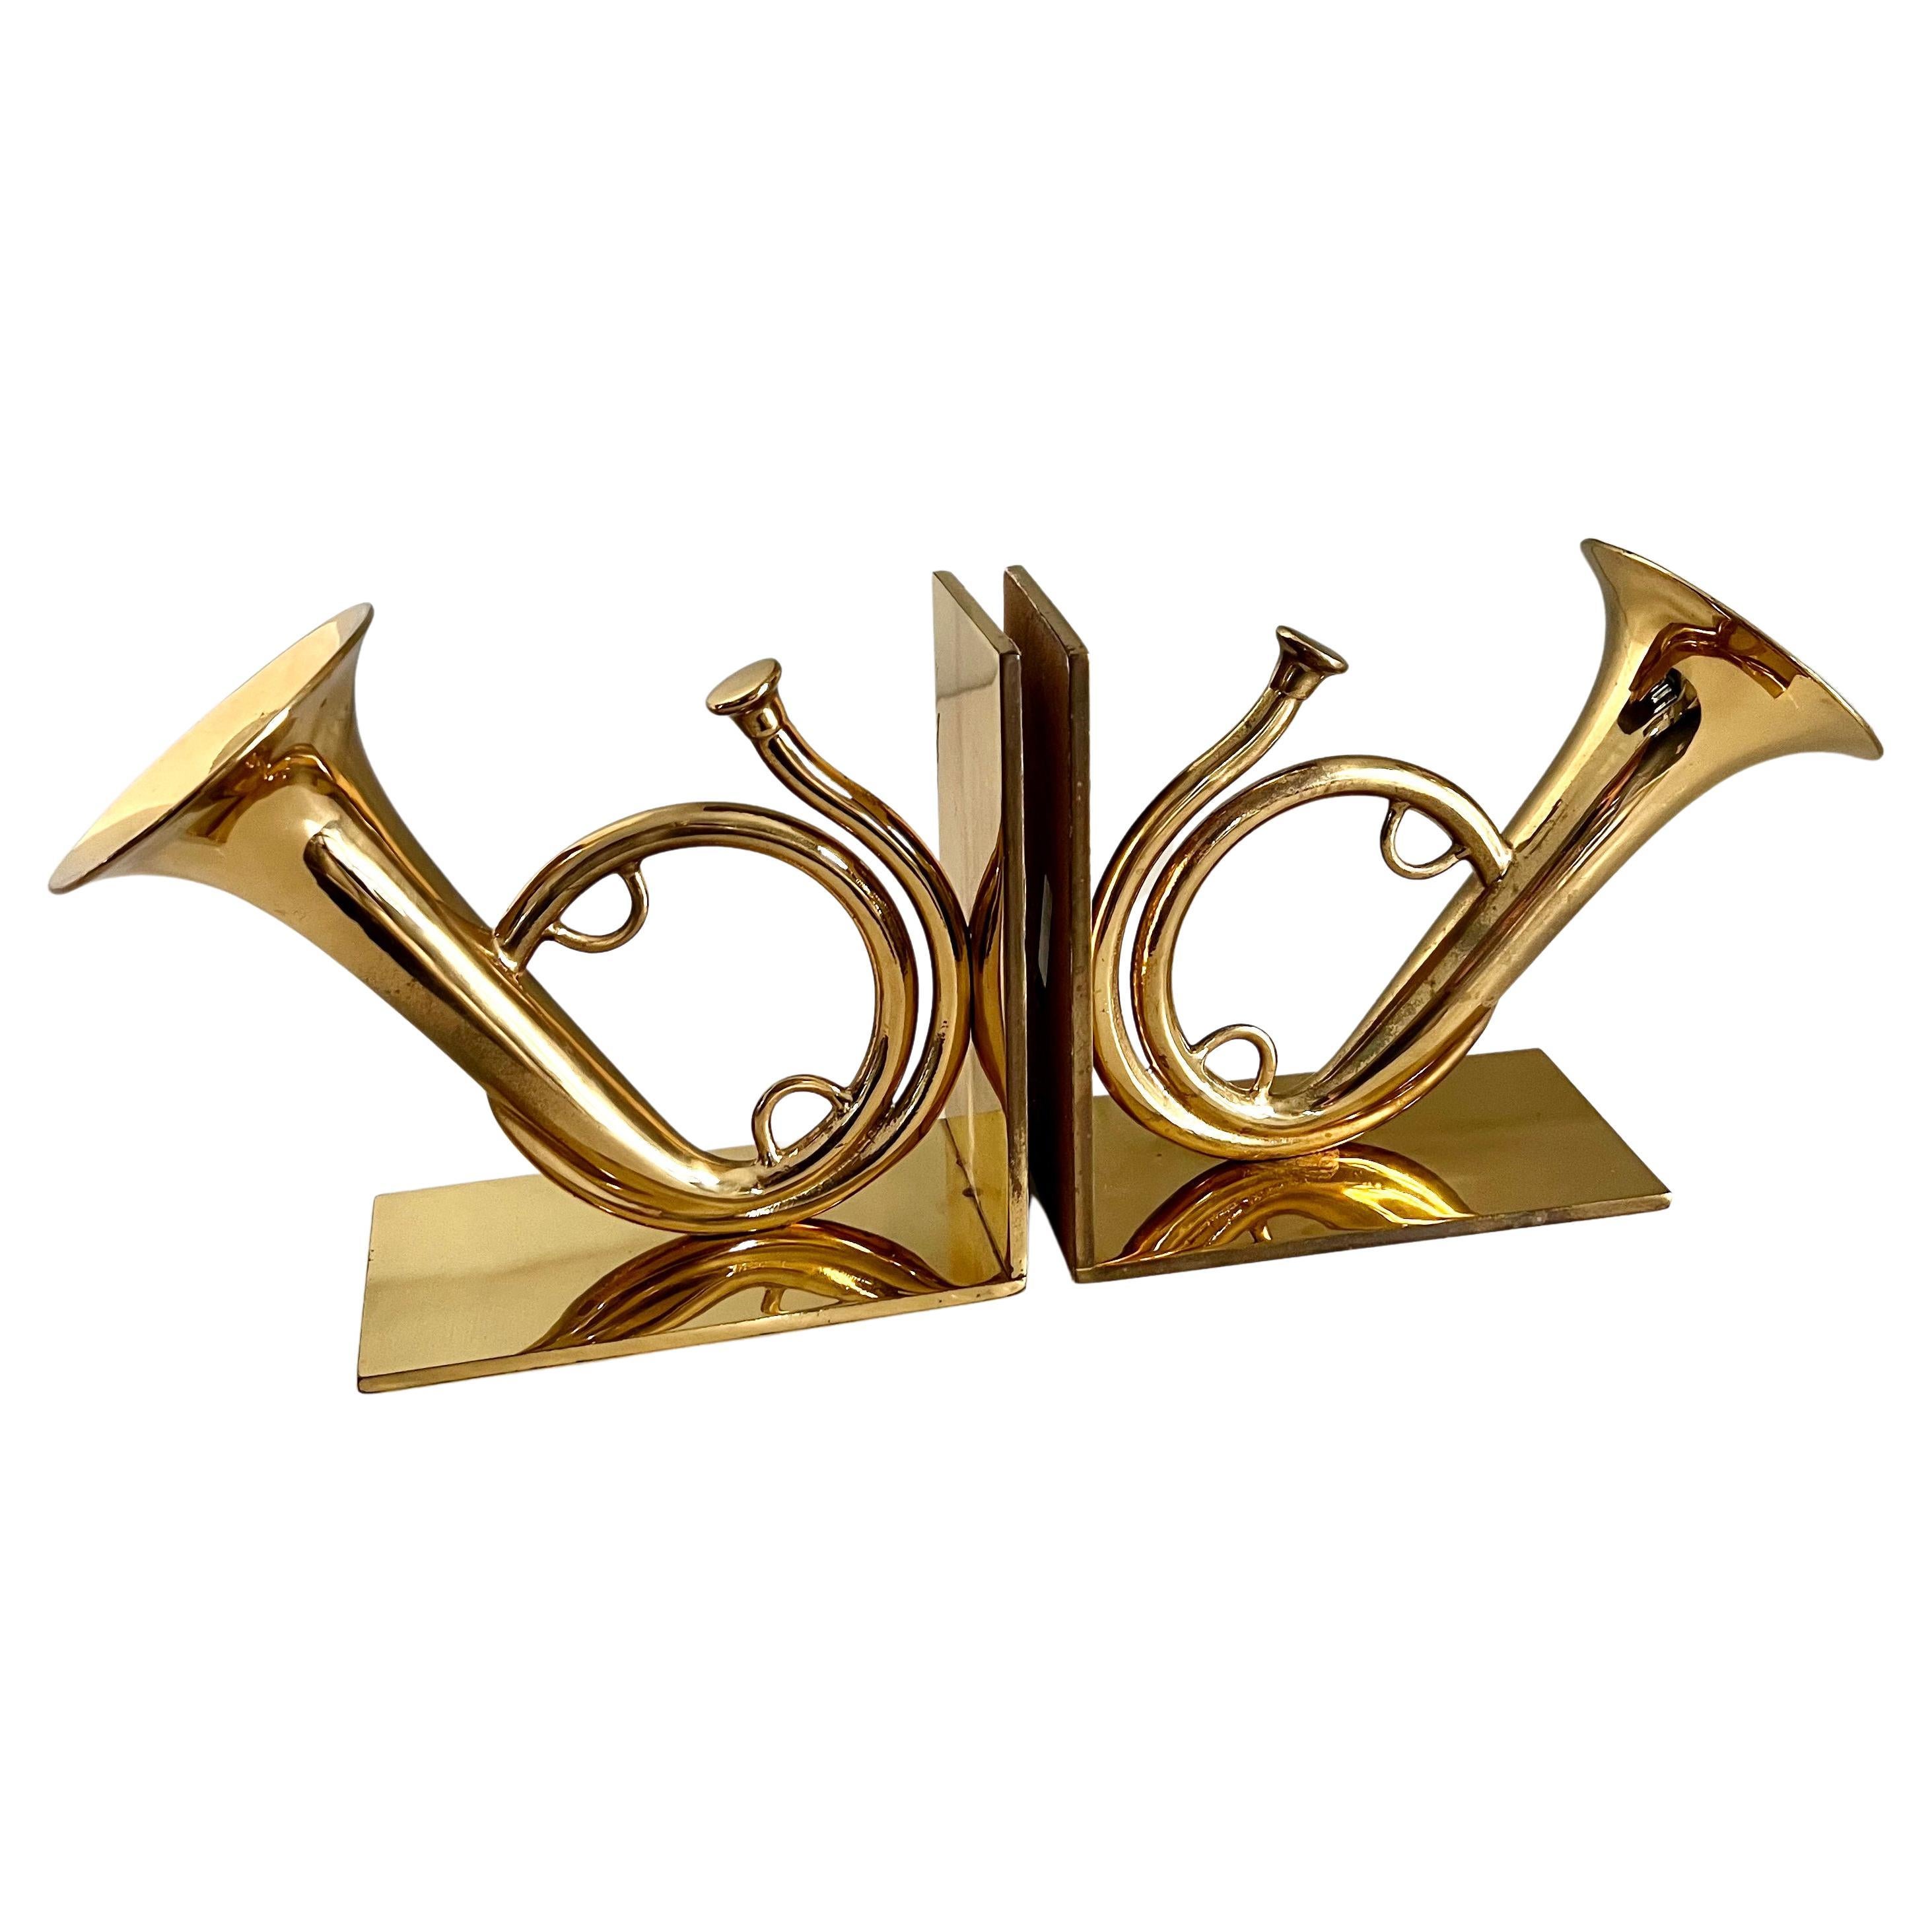 Pair of Solid Brass French Horn Bookends